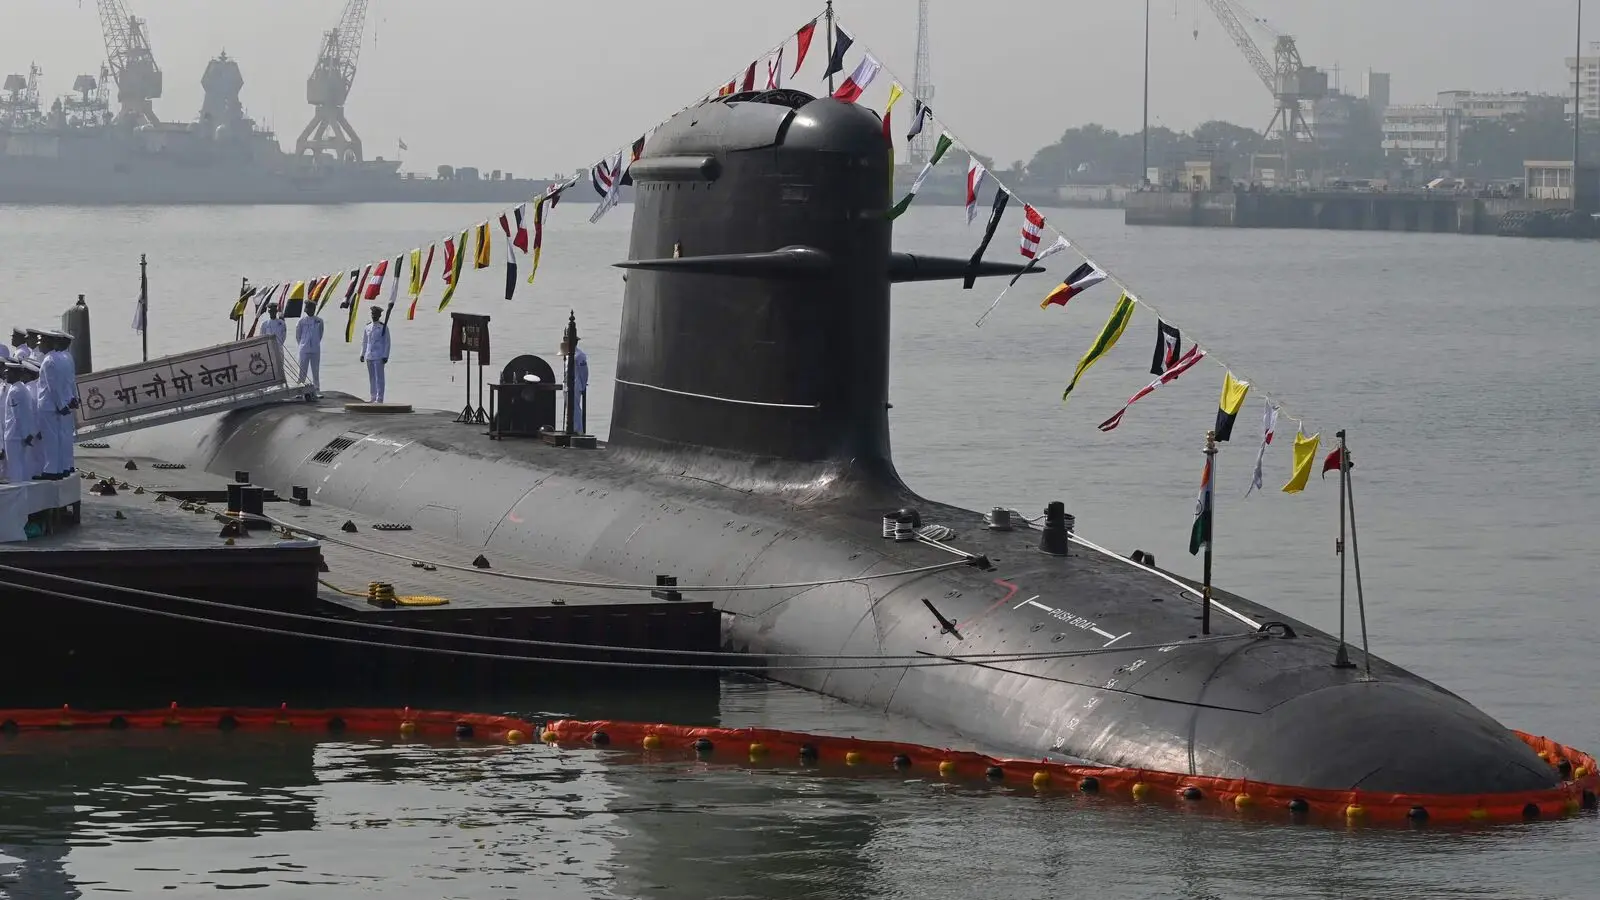 India to acquire more than 30 submarines to counter growing Chinese Navy